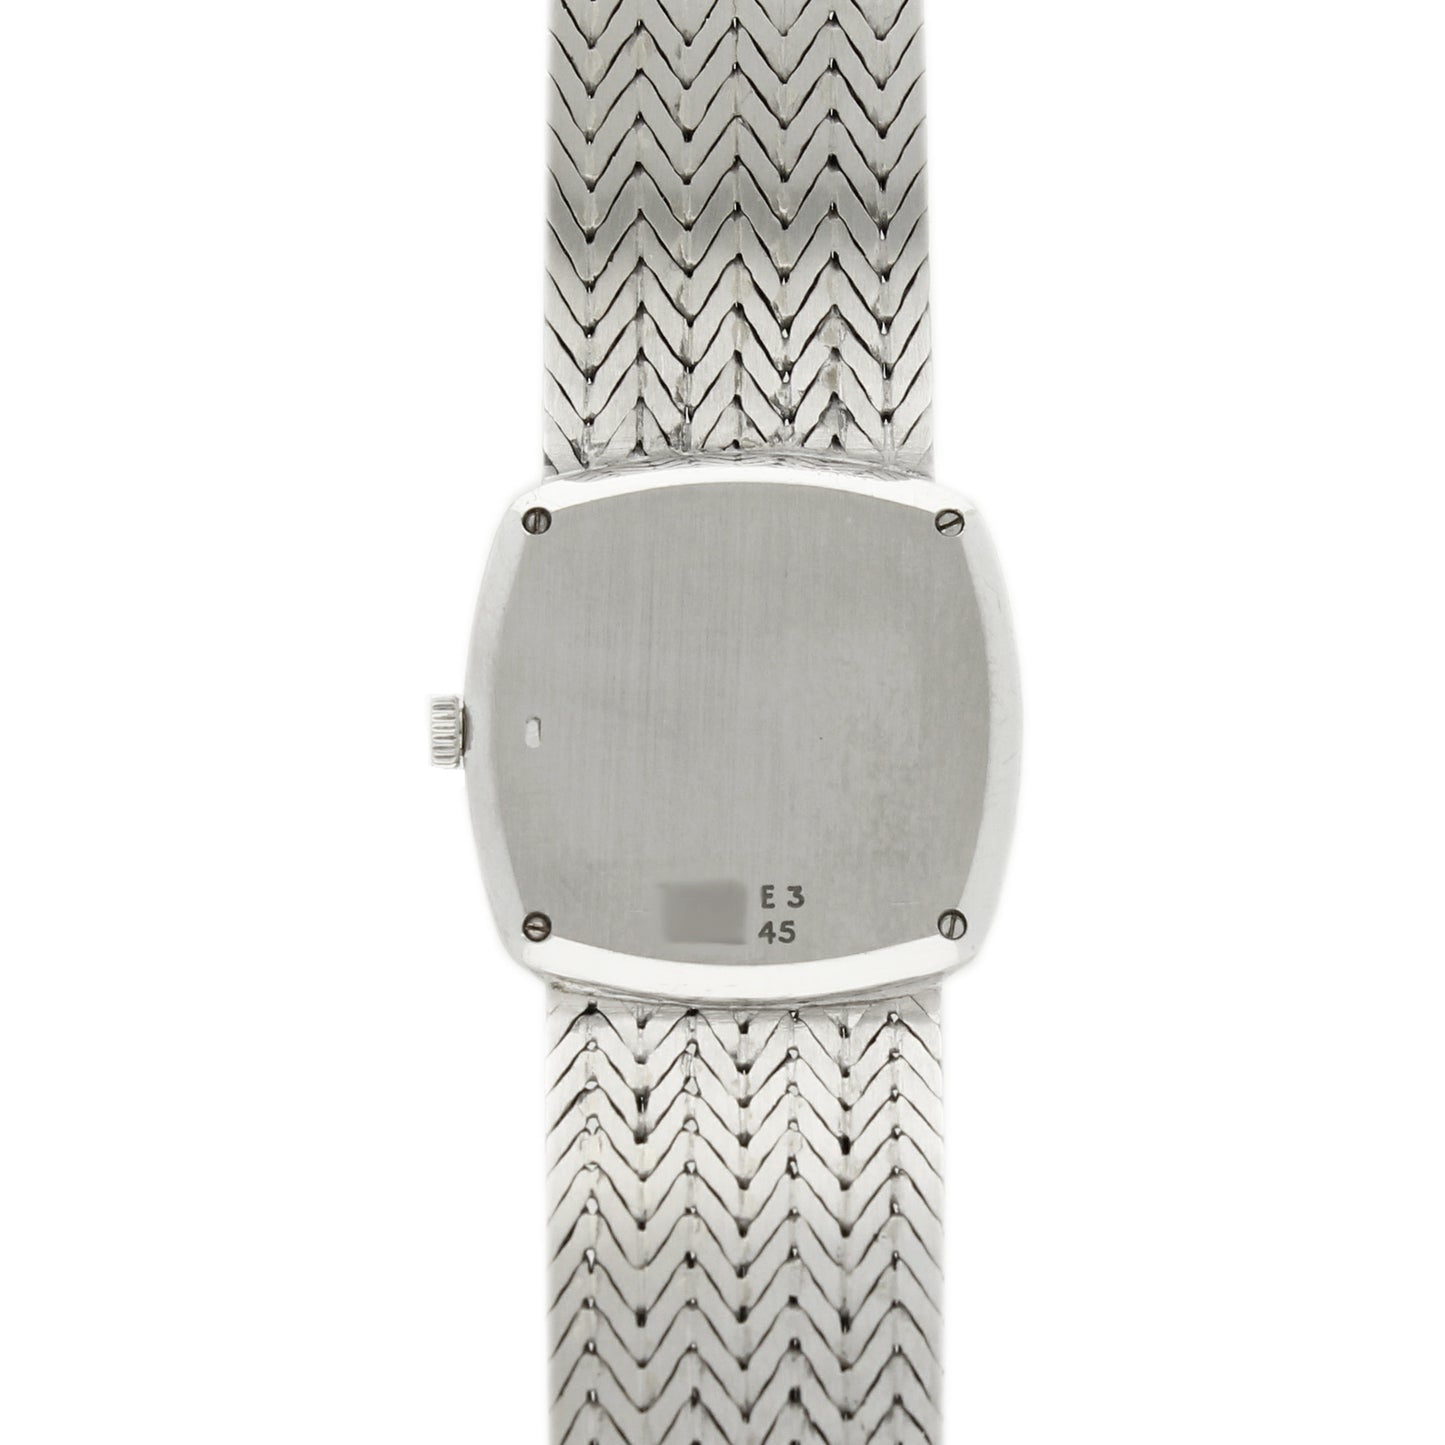 18ct white gold 'cushion cased' with silvered dial and diamond set bezel bracelet watch. Made 1970's